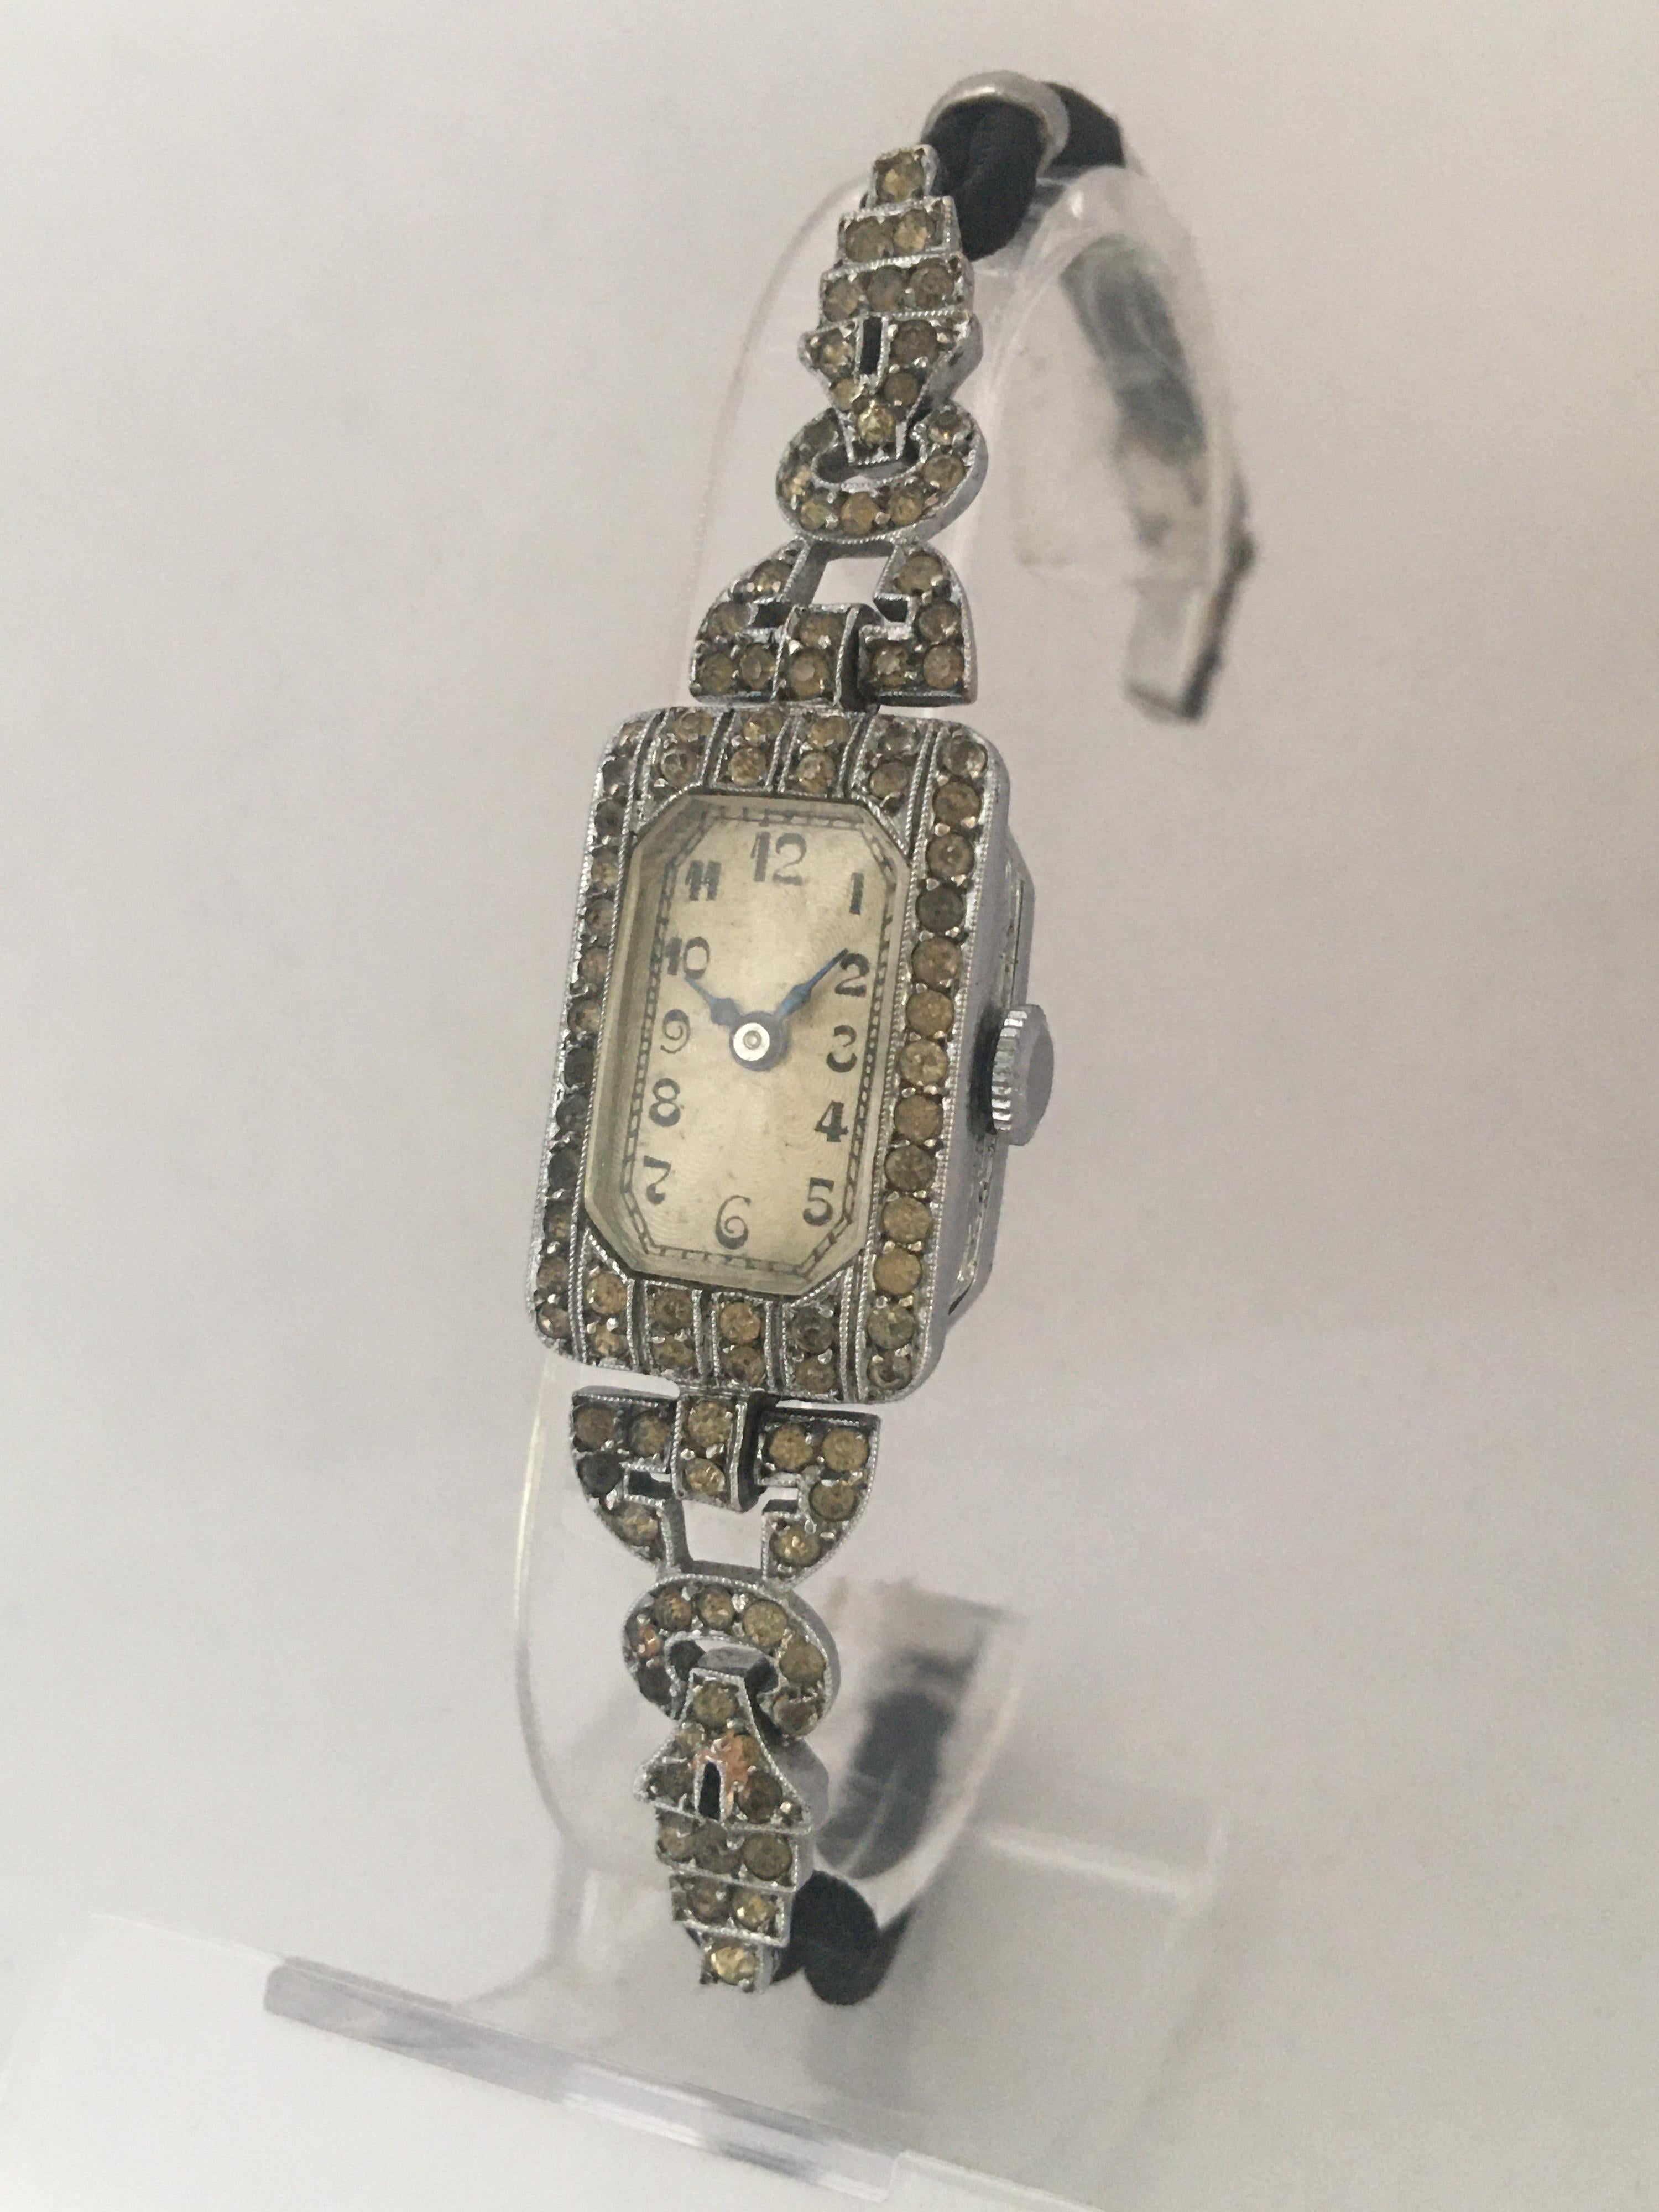 This beautiful vintage hand winding ladies cocktail watch is in good working condition and it is ticking well. It has recently been serviced and runs well. Visible signs of ageing and wear with tiny and light scratches on the glass and on the watch